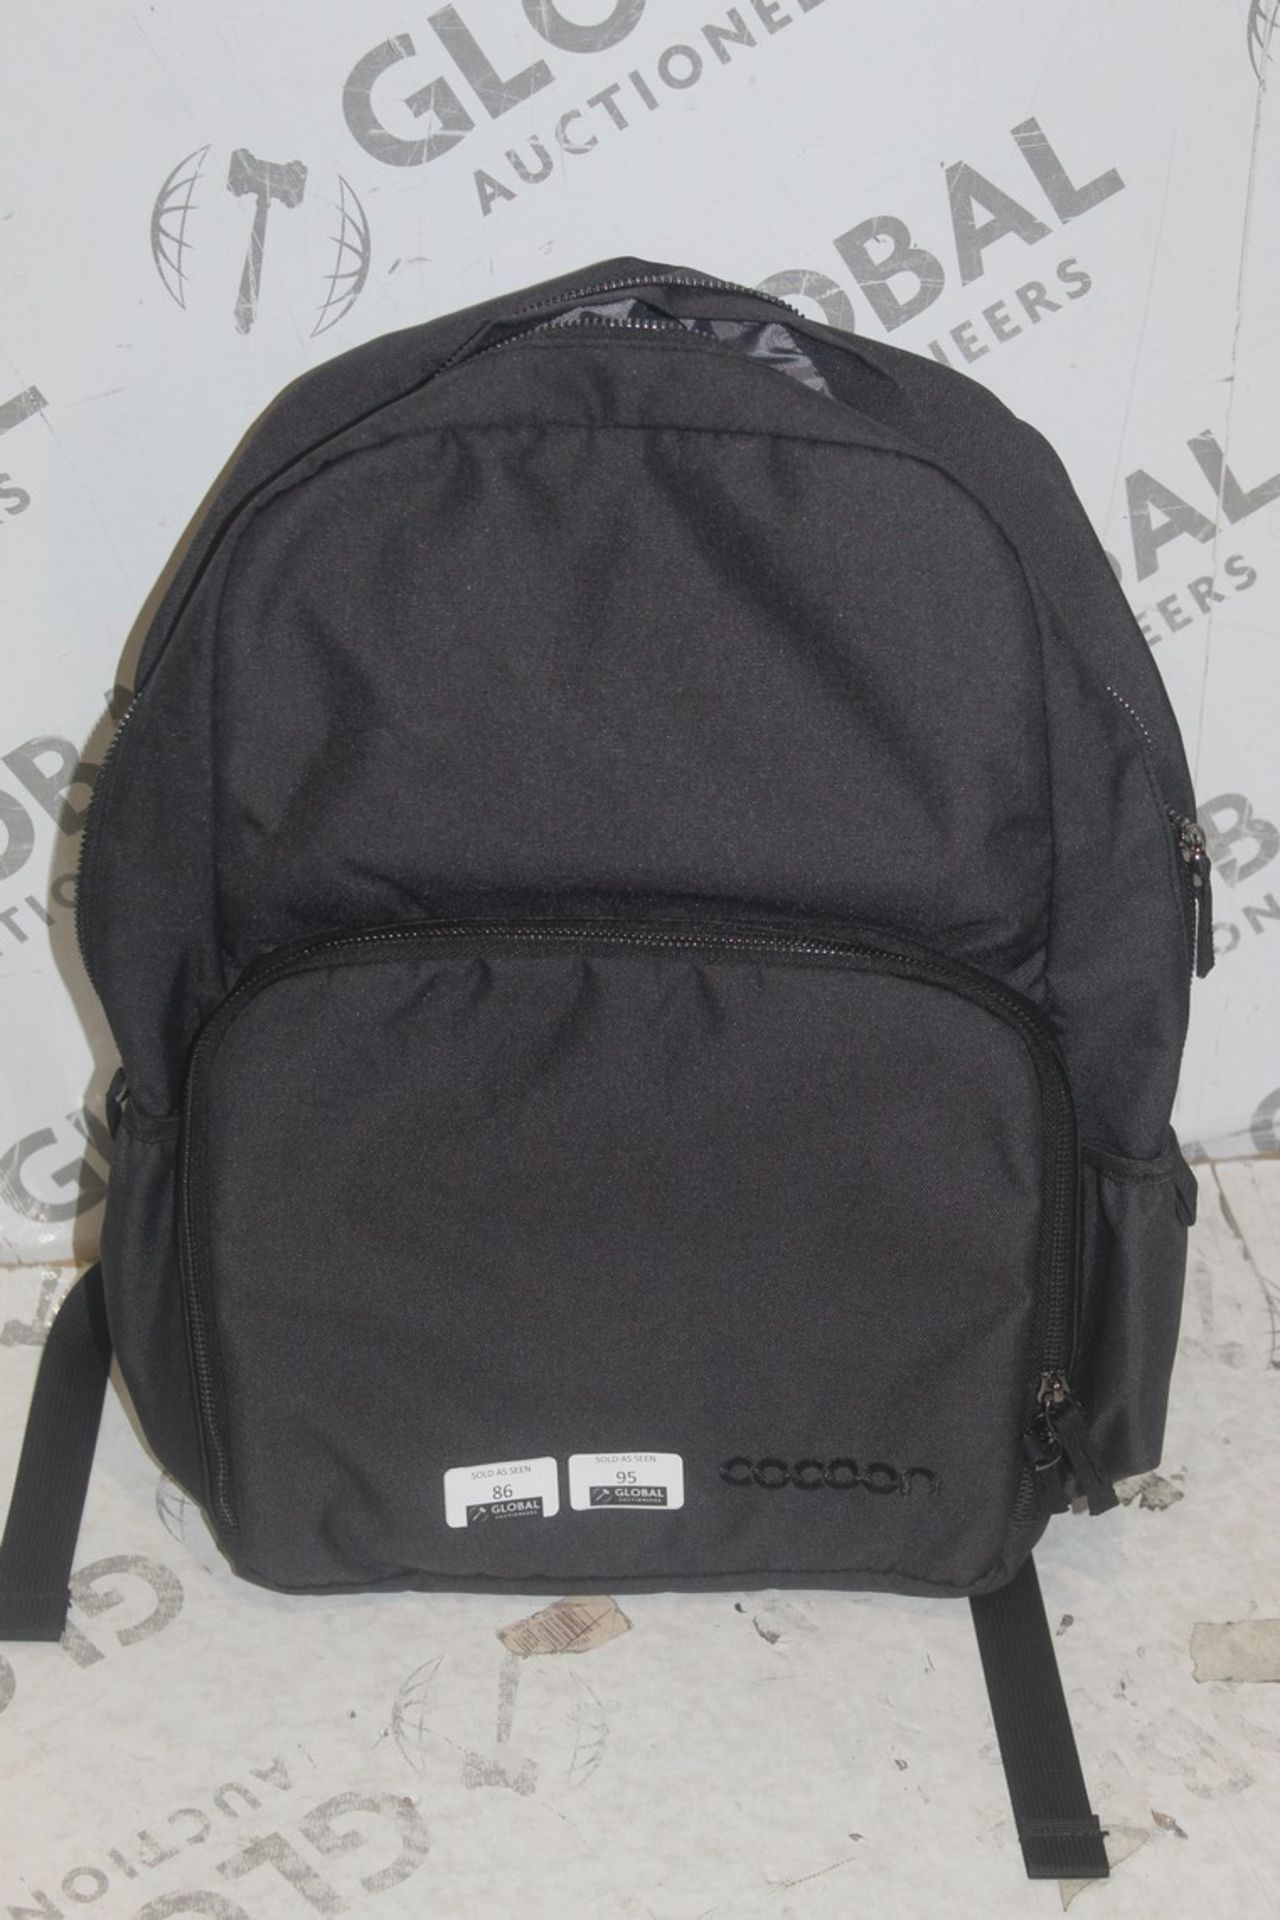 Cocoon 15 Inch Laptop Rucksack With Built In Griddit RRP £80 (Pictures For Illustration Purposes